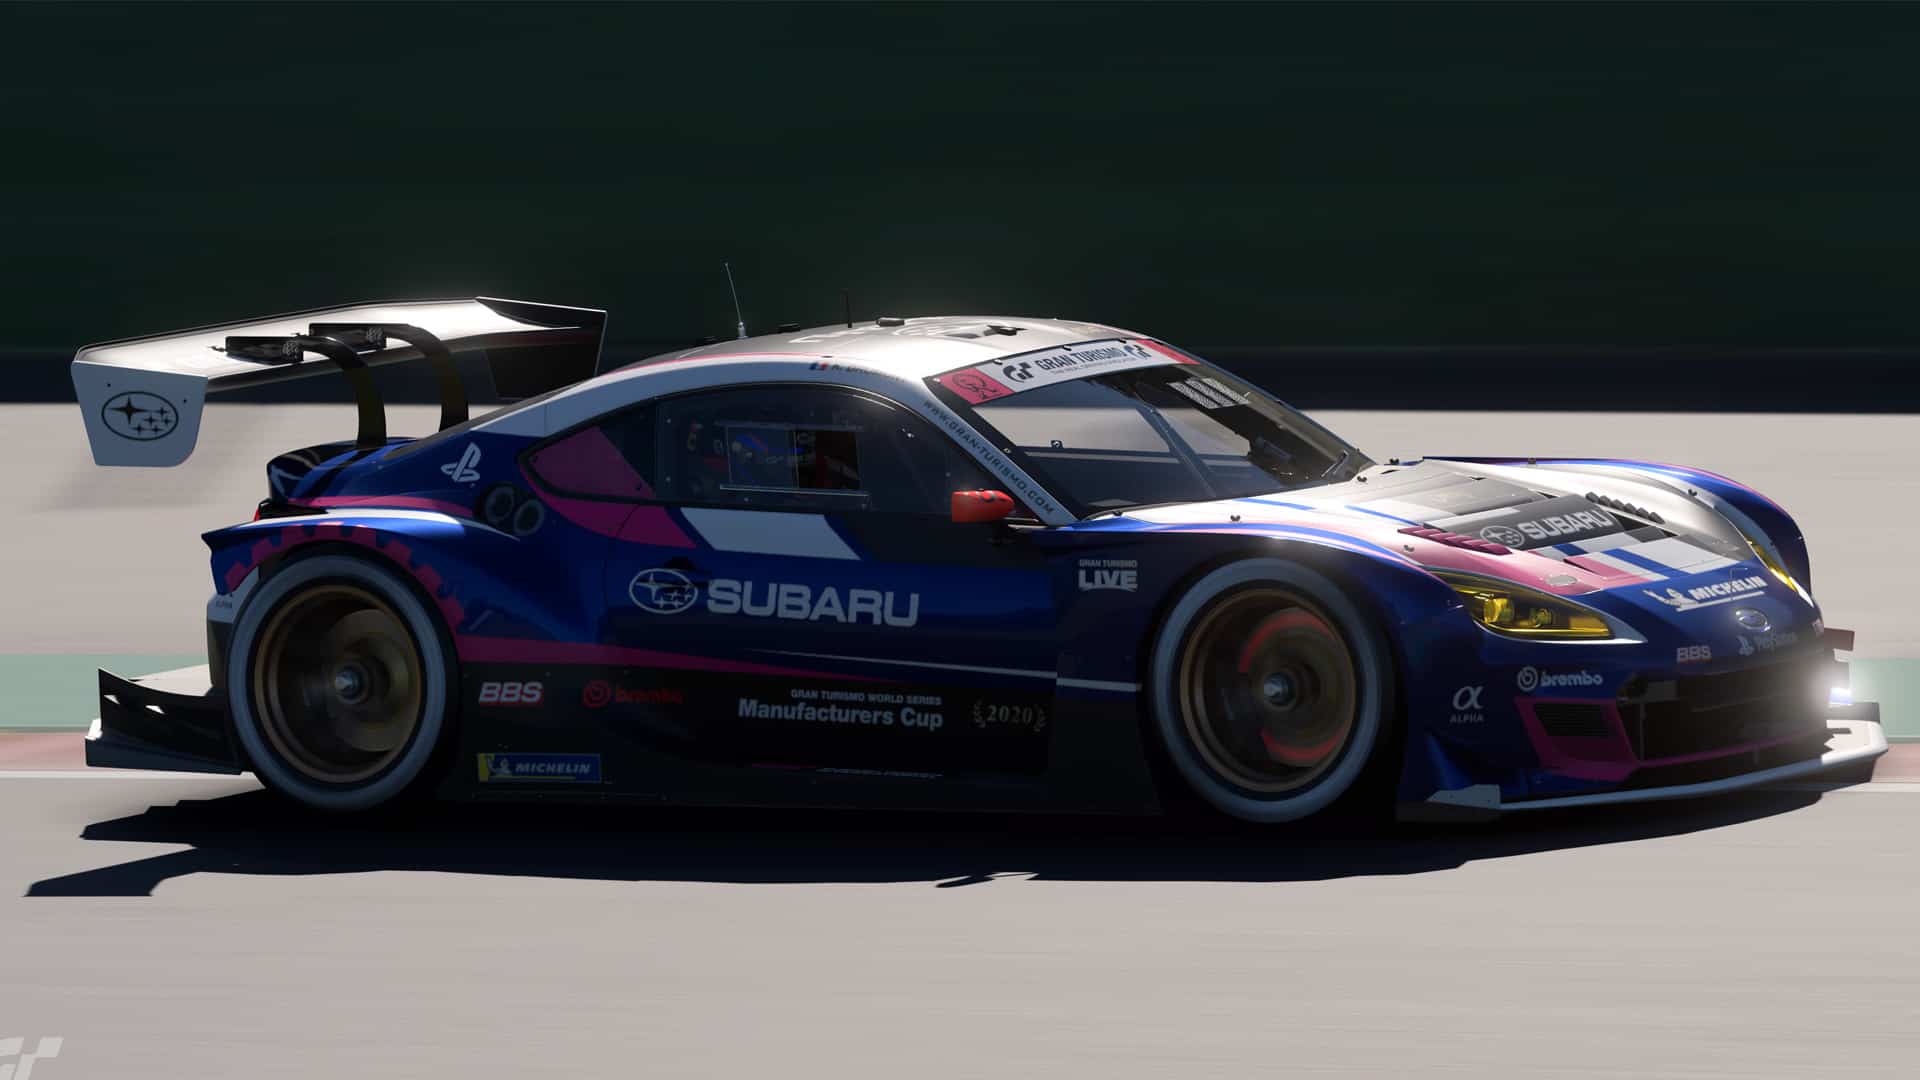 The third round of Gran Turismo's World Series starts this weekend